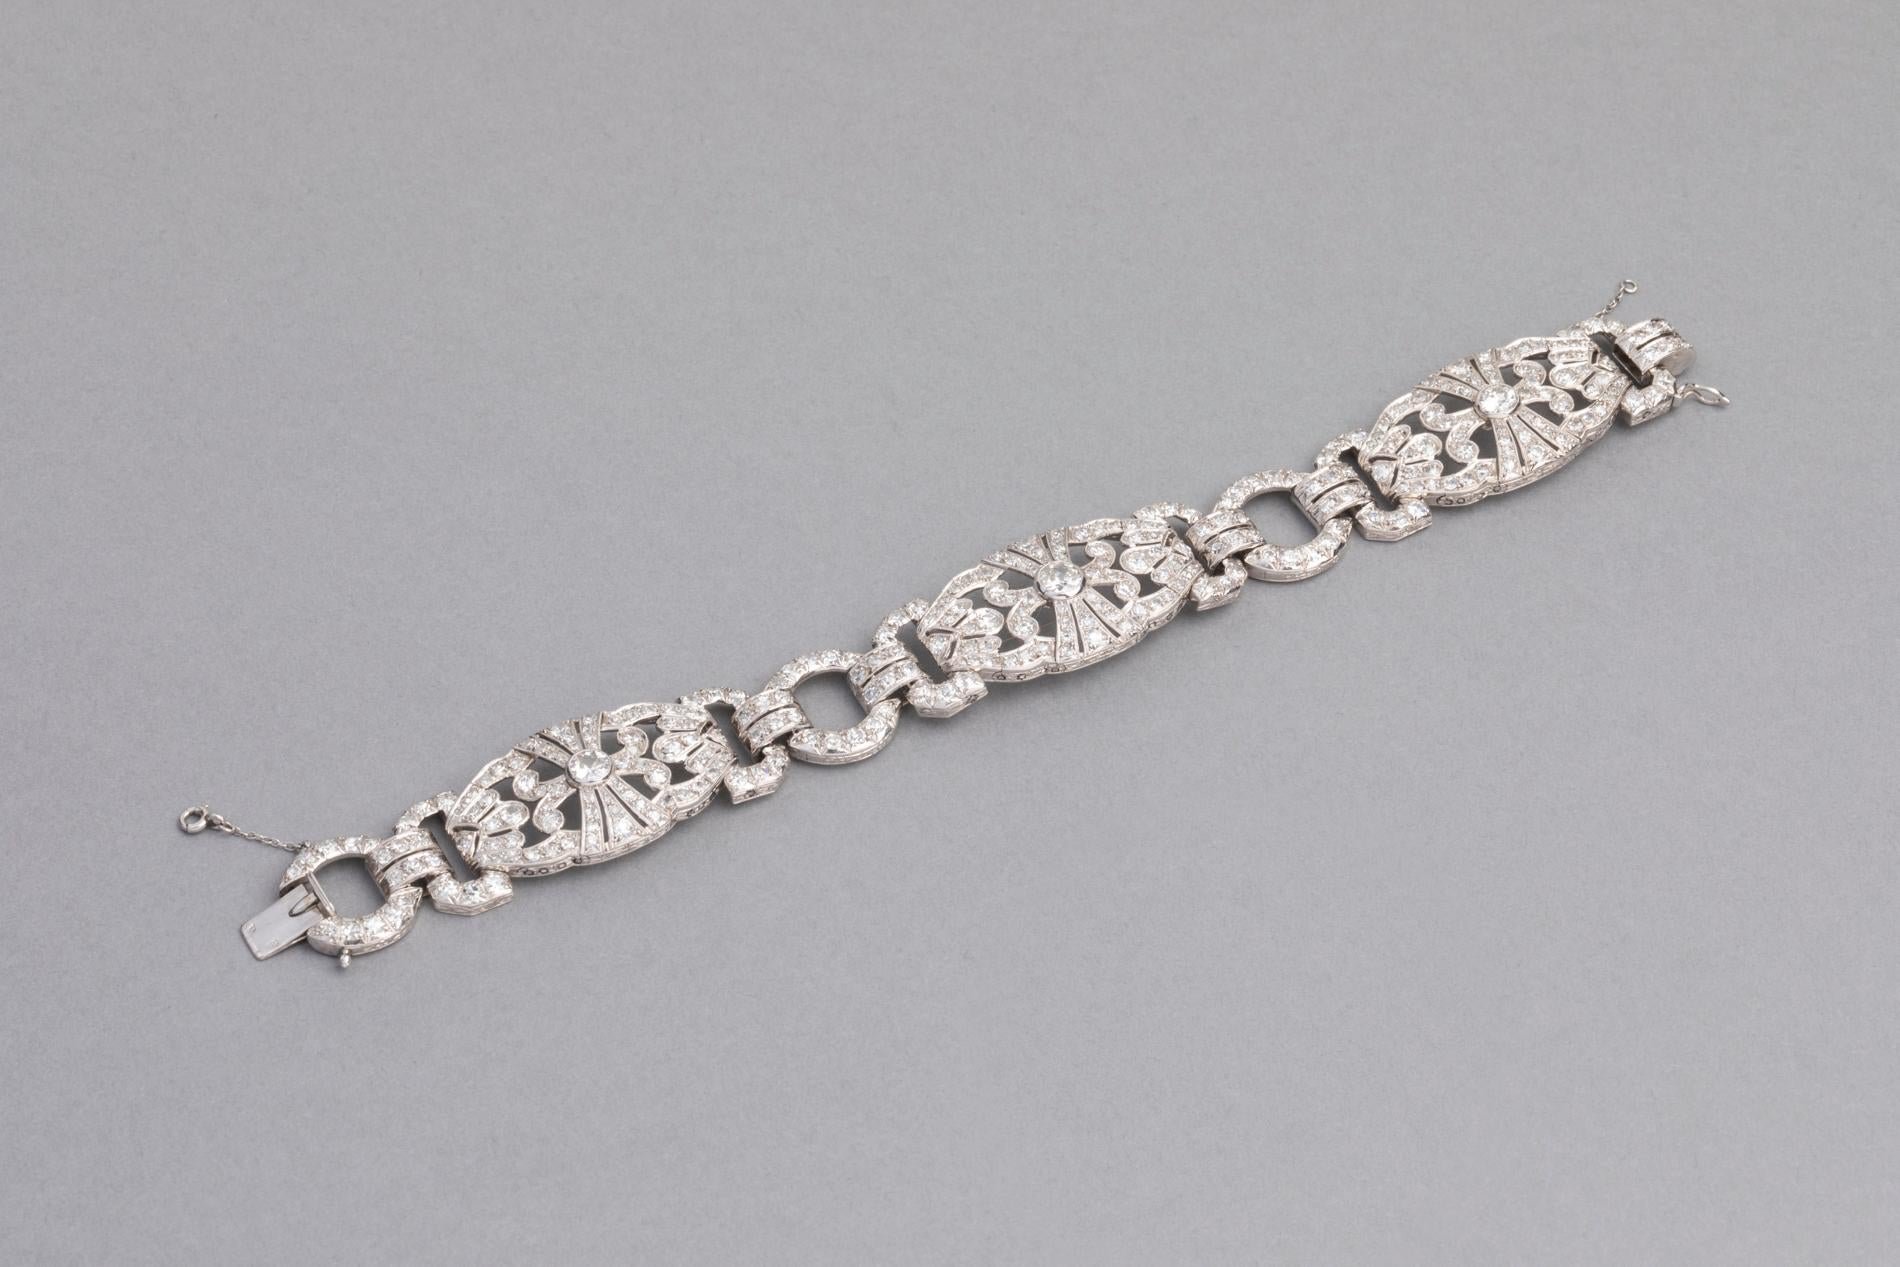 Very beautiful Art Deco Bracelet, made in France circa 1930.  
Mounted in white gold 18K and beautiful diamonds. 
French marks for gold 18k (old eagle) and mark of the maker/numbers.   
The weight off the diamonds is 9 carats estimate. The principal